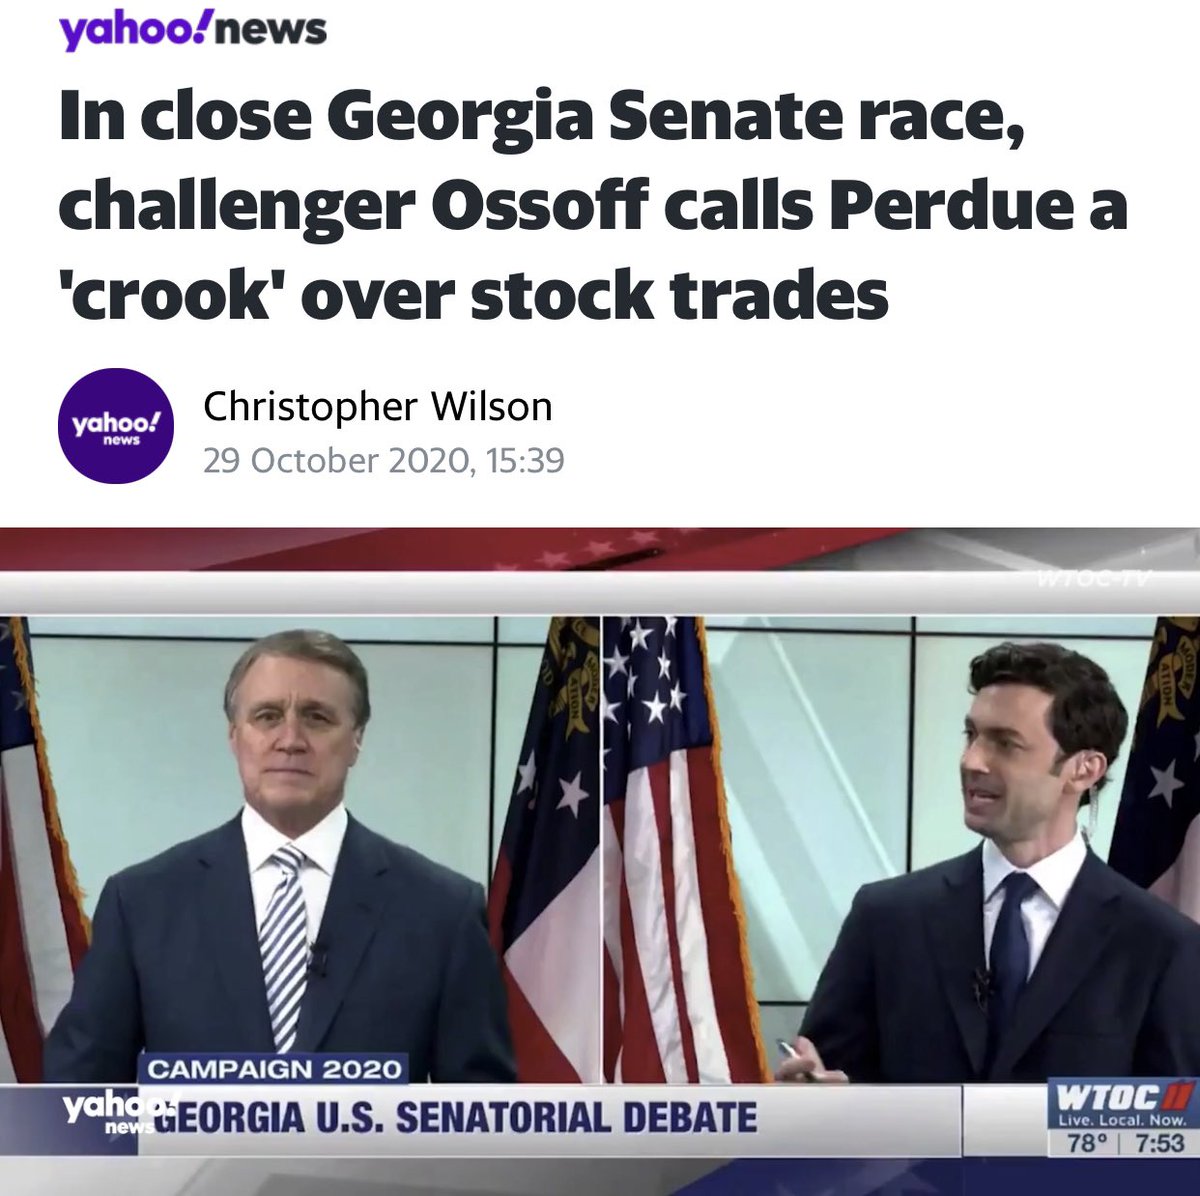 4) Perdue is also a “crook”